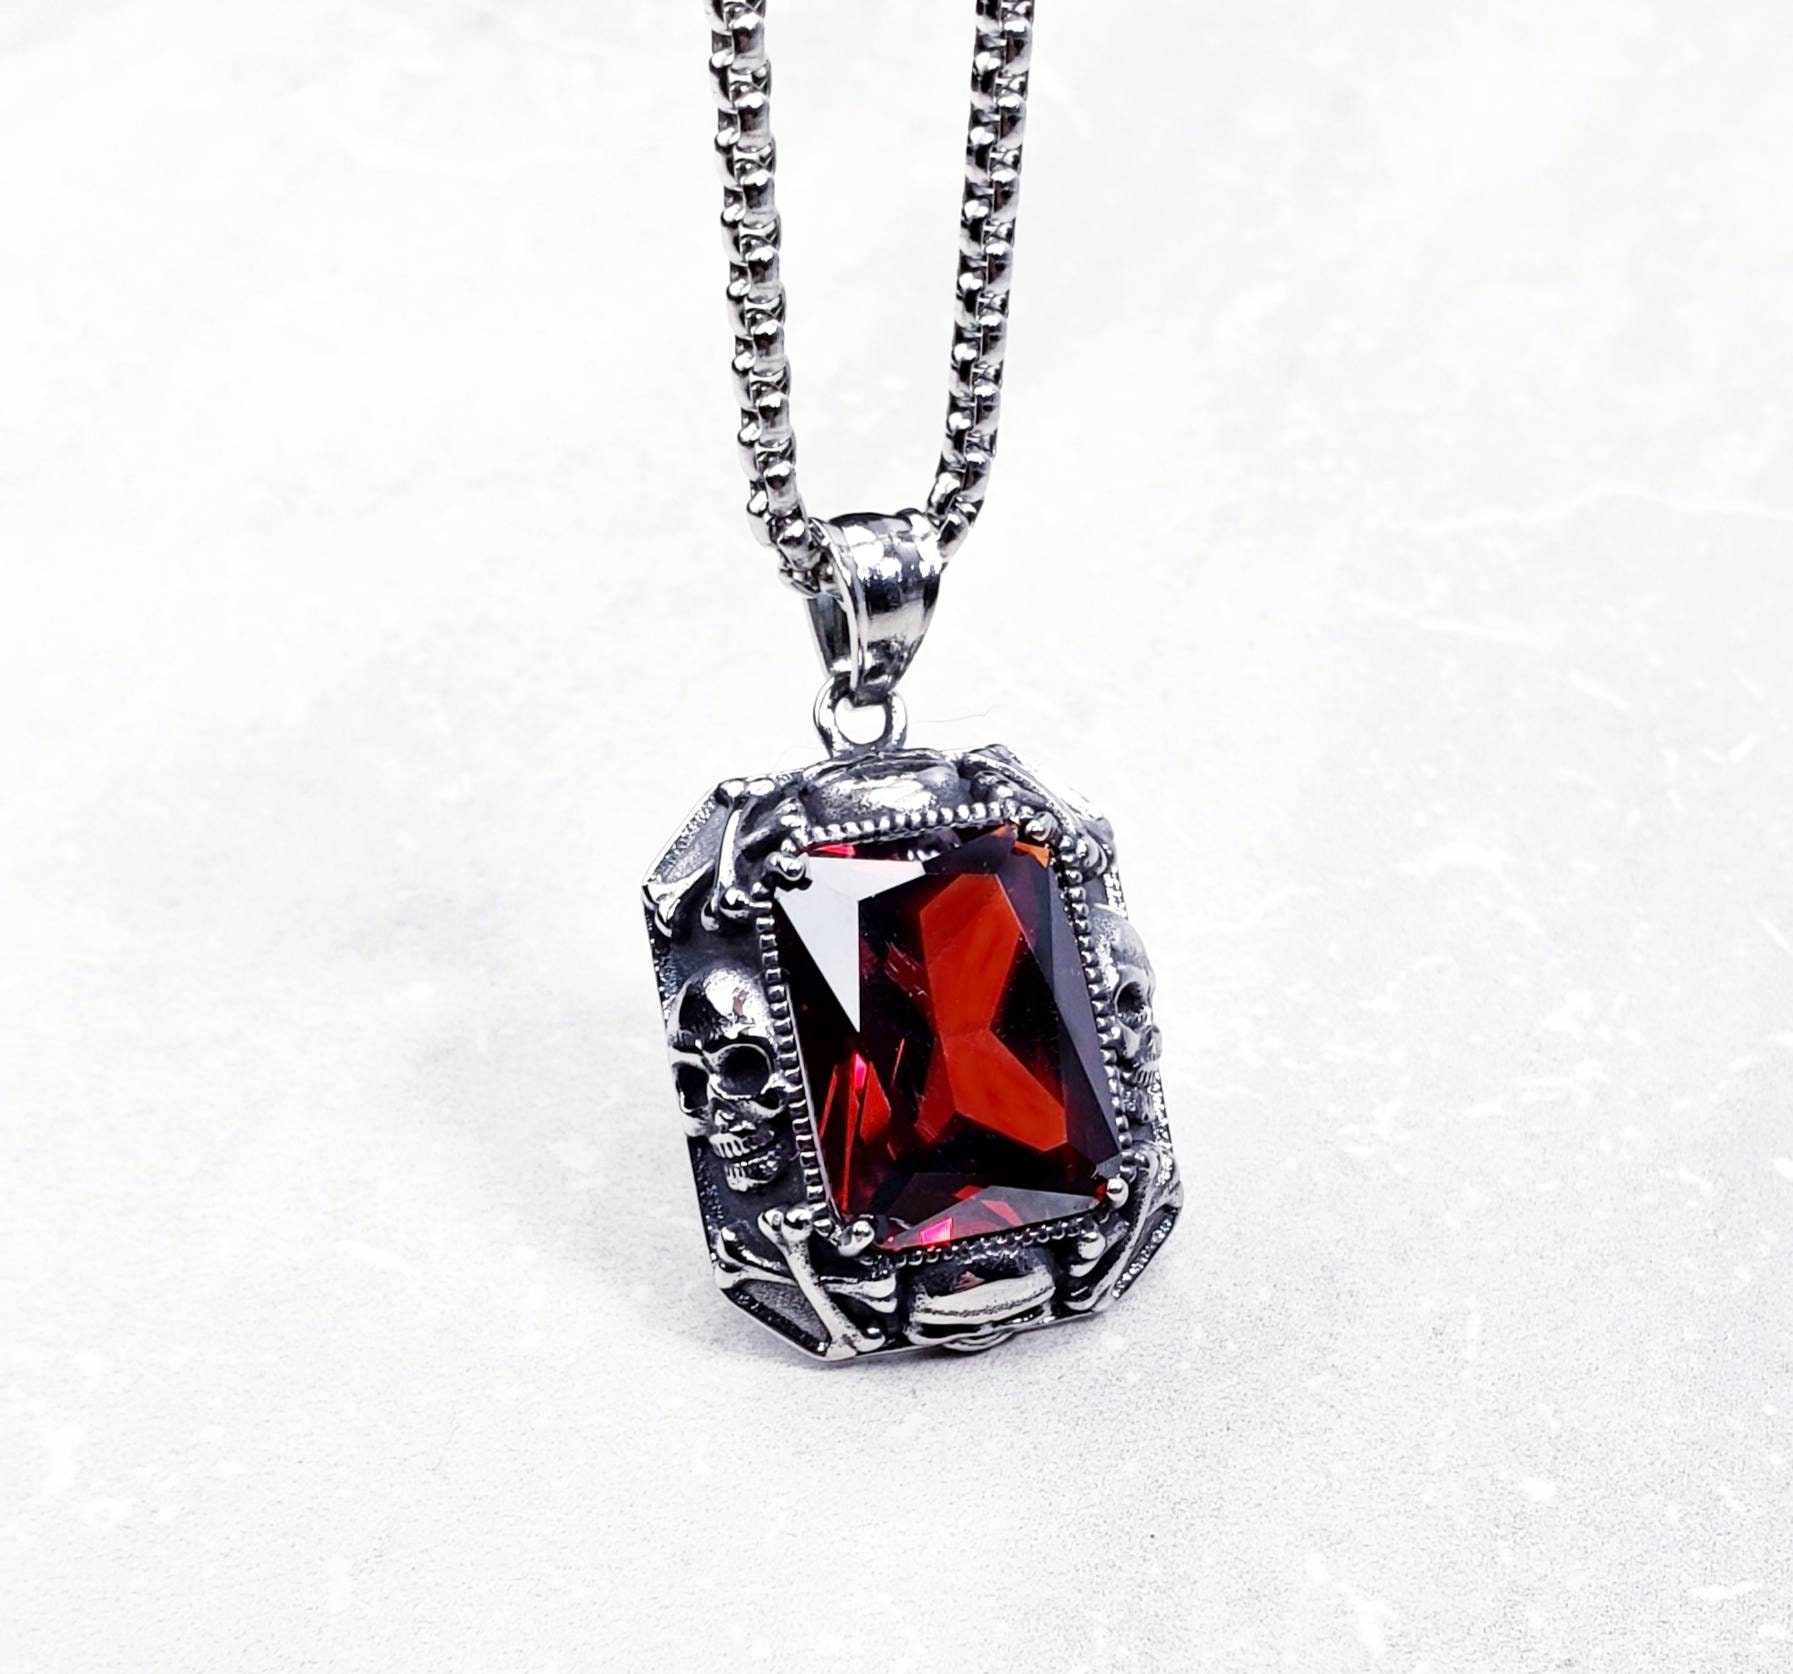 Red agate stone pendant necklace with a sugar skull charm – DKTDesigns